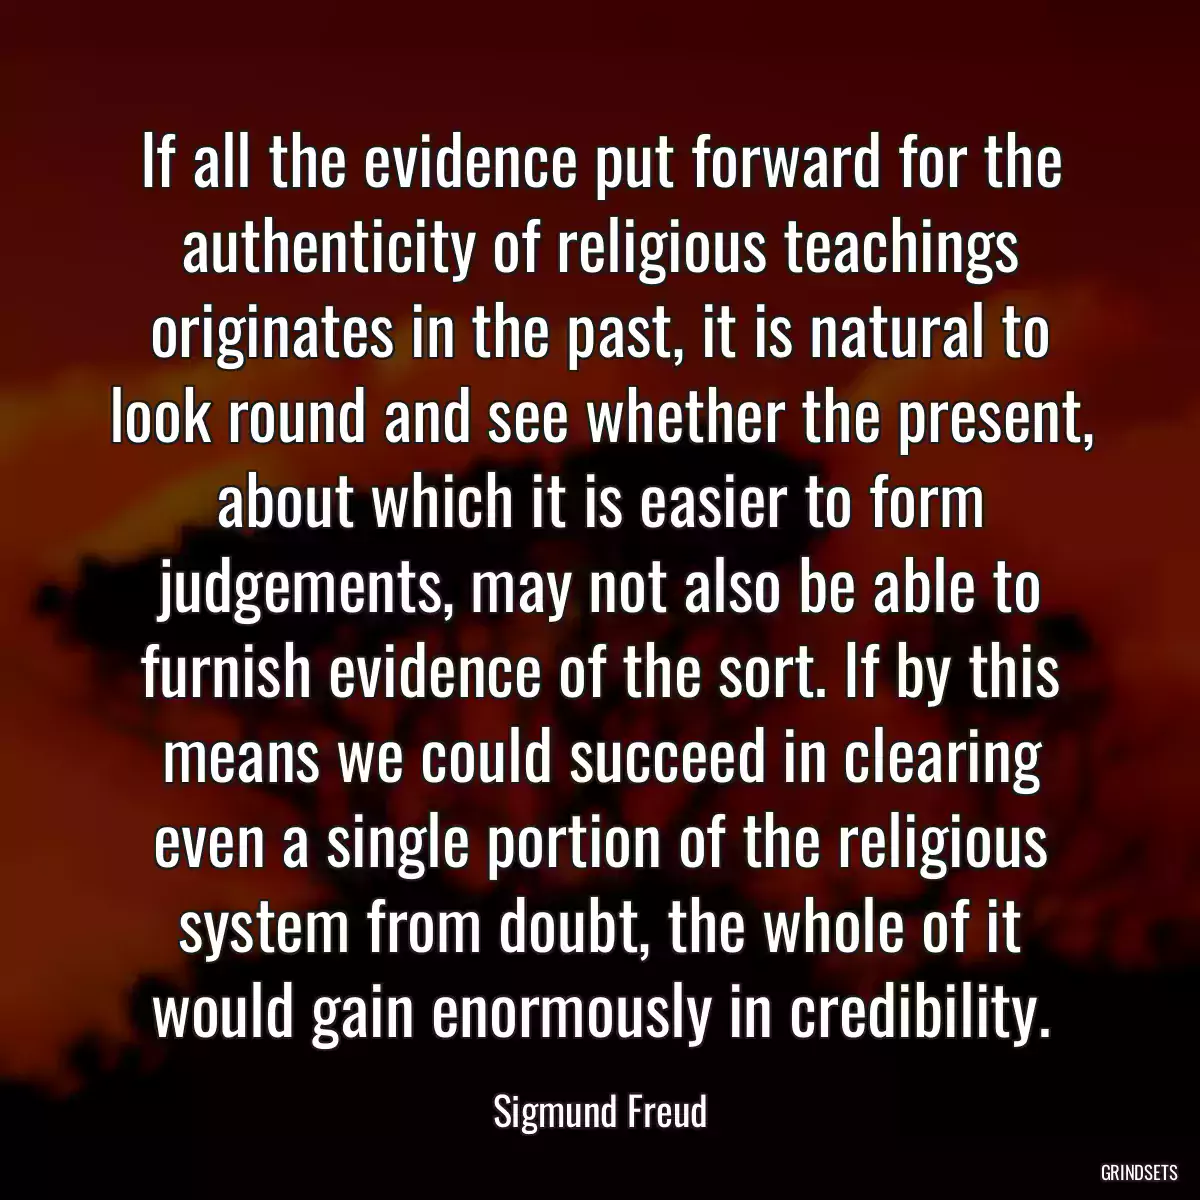 If all the evidence put forward for the authenticity of religious teachings originates in the past, it is natural to look round and see whether the present, about which it is easier to form judgements, may not also be able to furnish evidence of the sort. If by this means we could succeed in clearing even a single portion of the religious system from doubt, the whole of it would gain enormously in credibility.